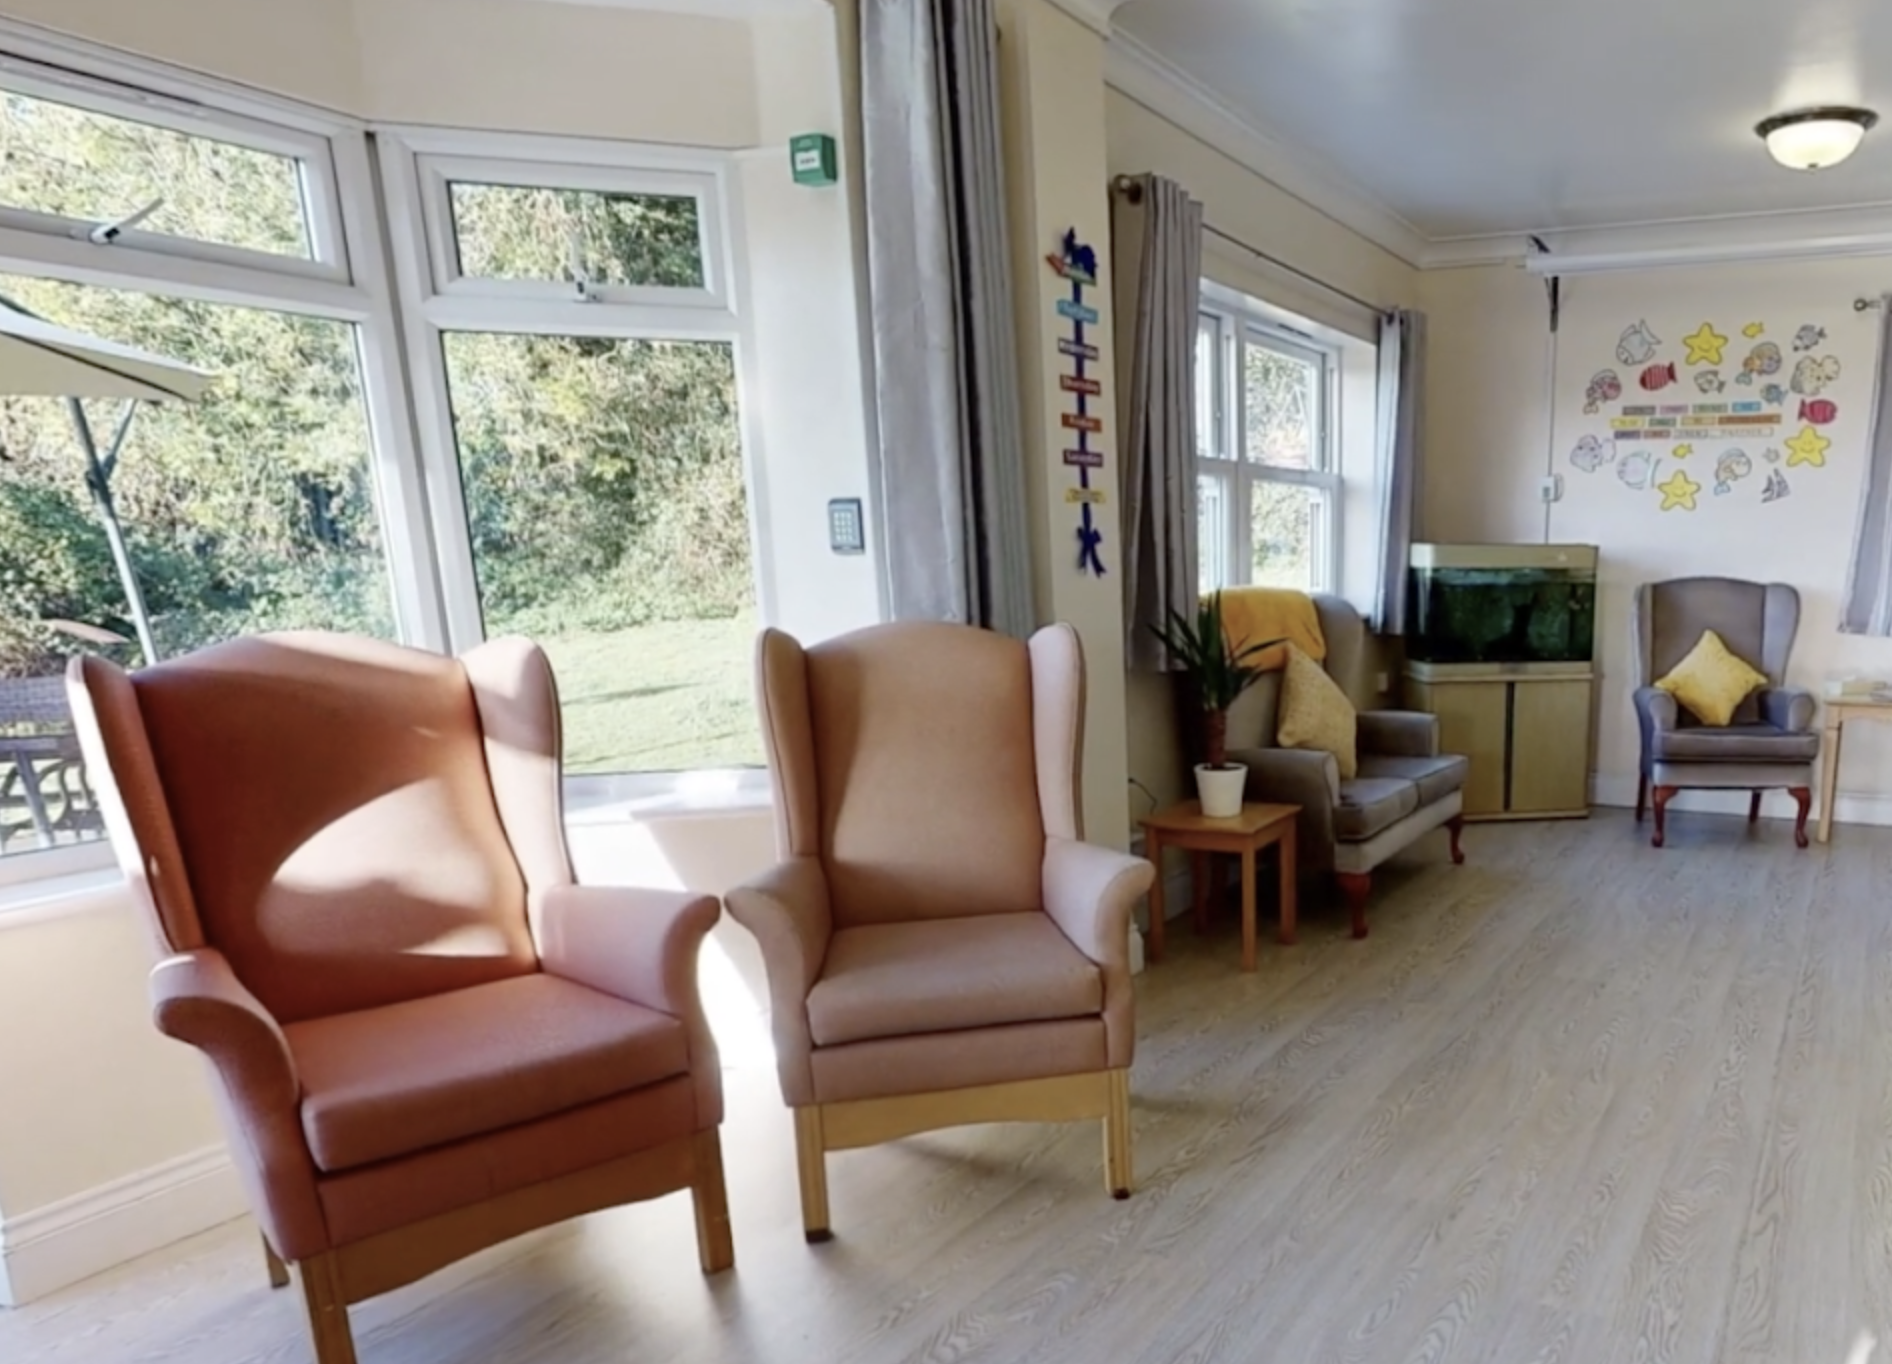 Lounge of Roselands care home in Rye, East Sussex